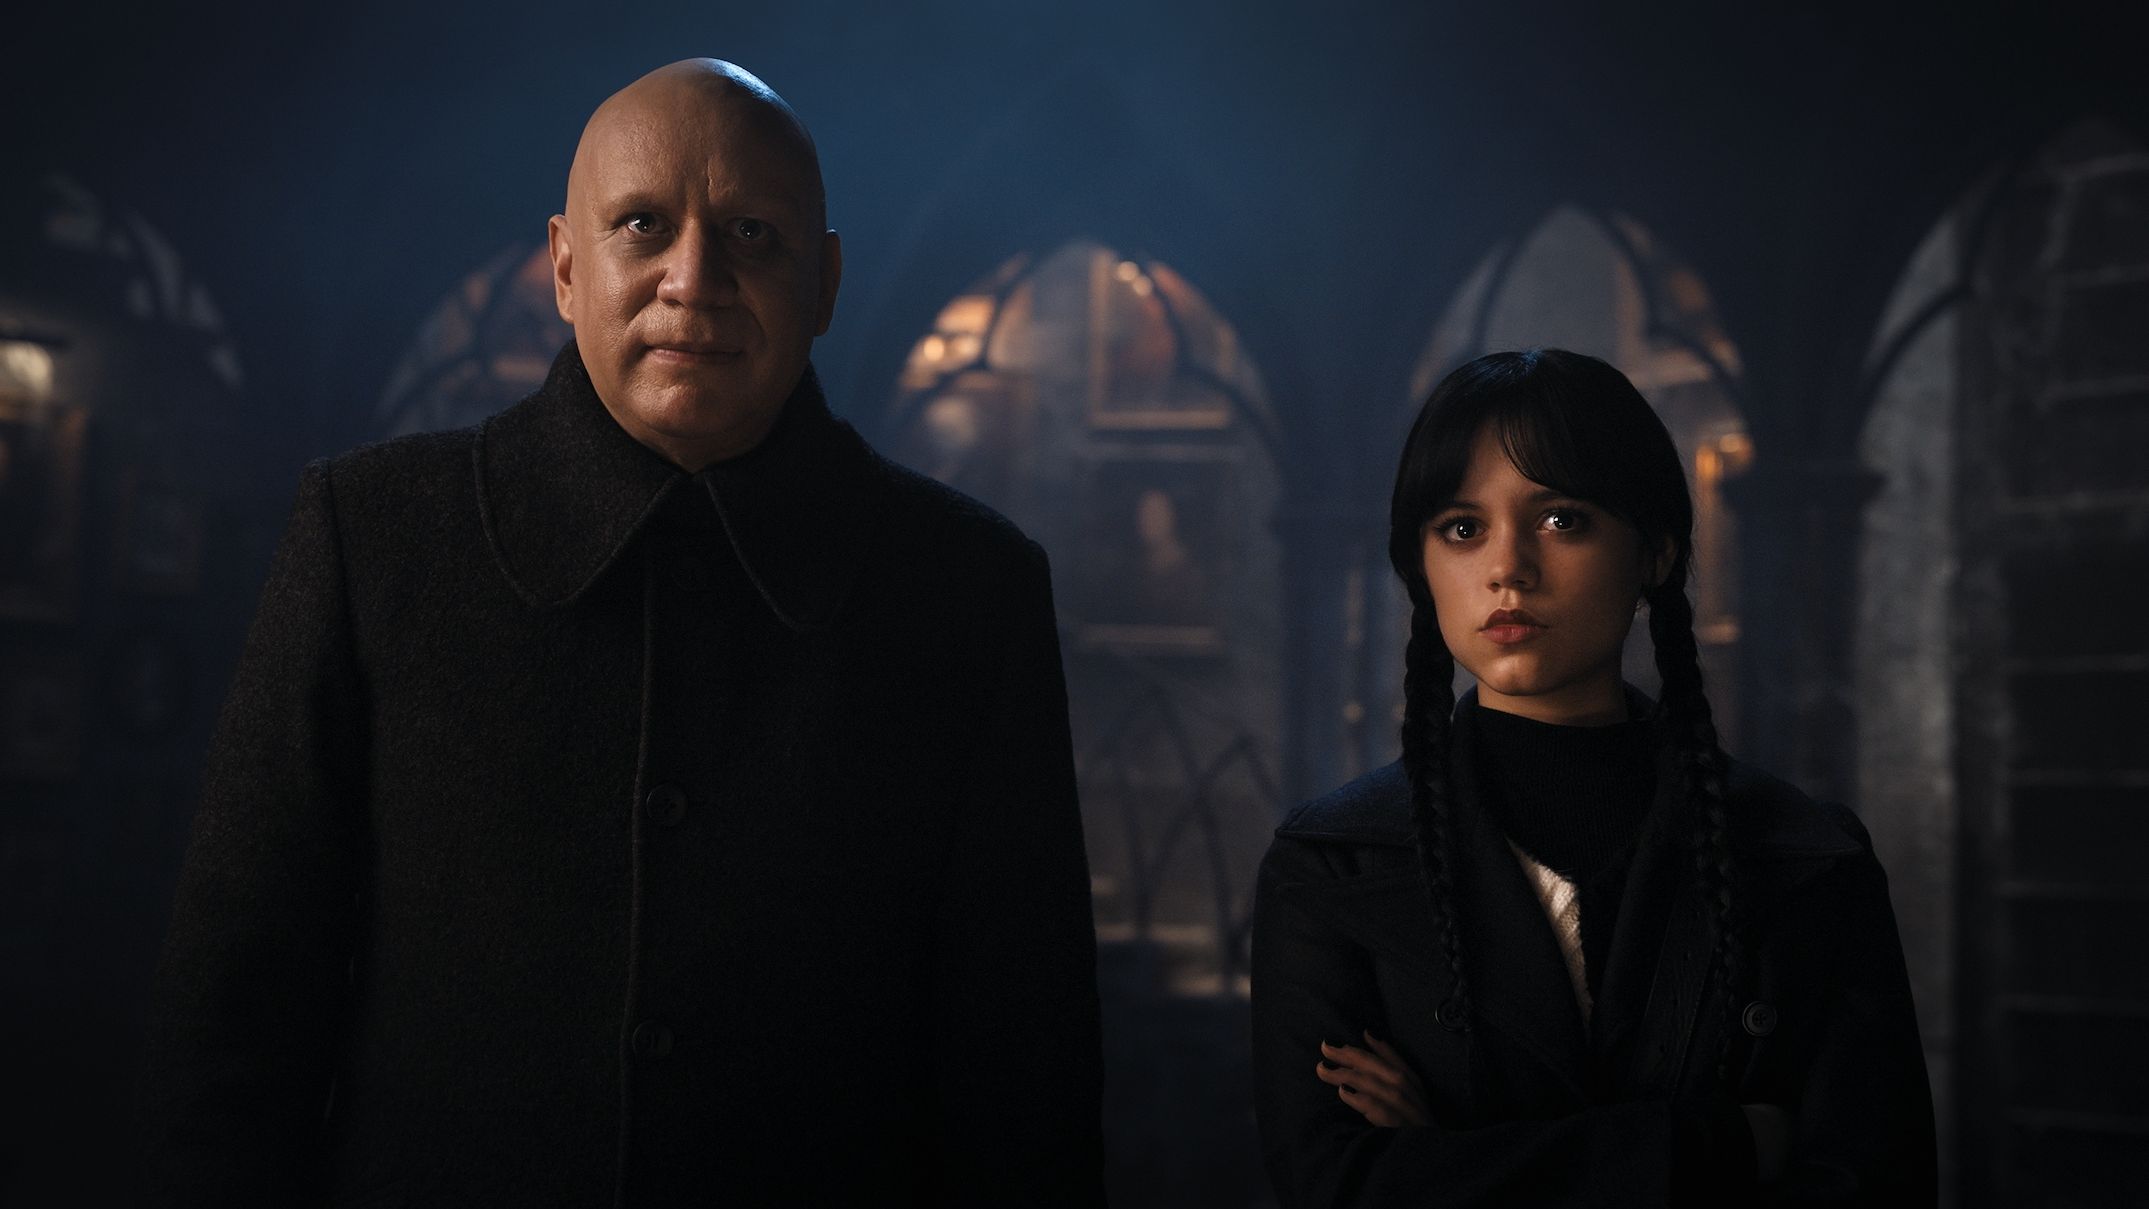 full body of a Wednesday Addams (Jenna Ortega) and uncle Fester